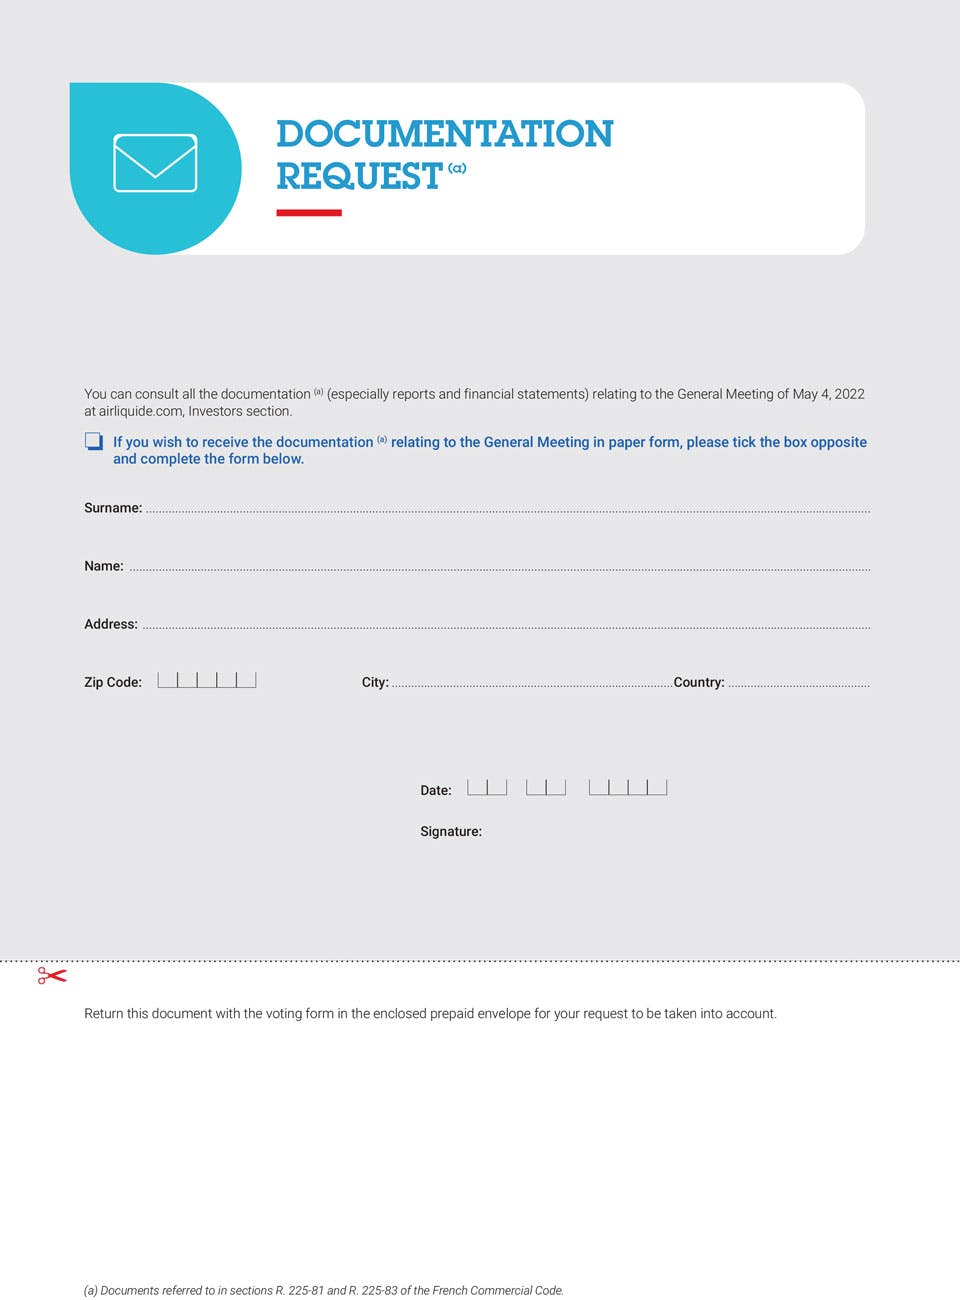 This image shows the document to be filled in when sending the form for the documentation request.